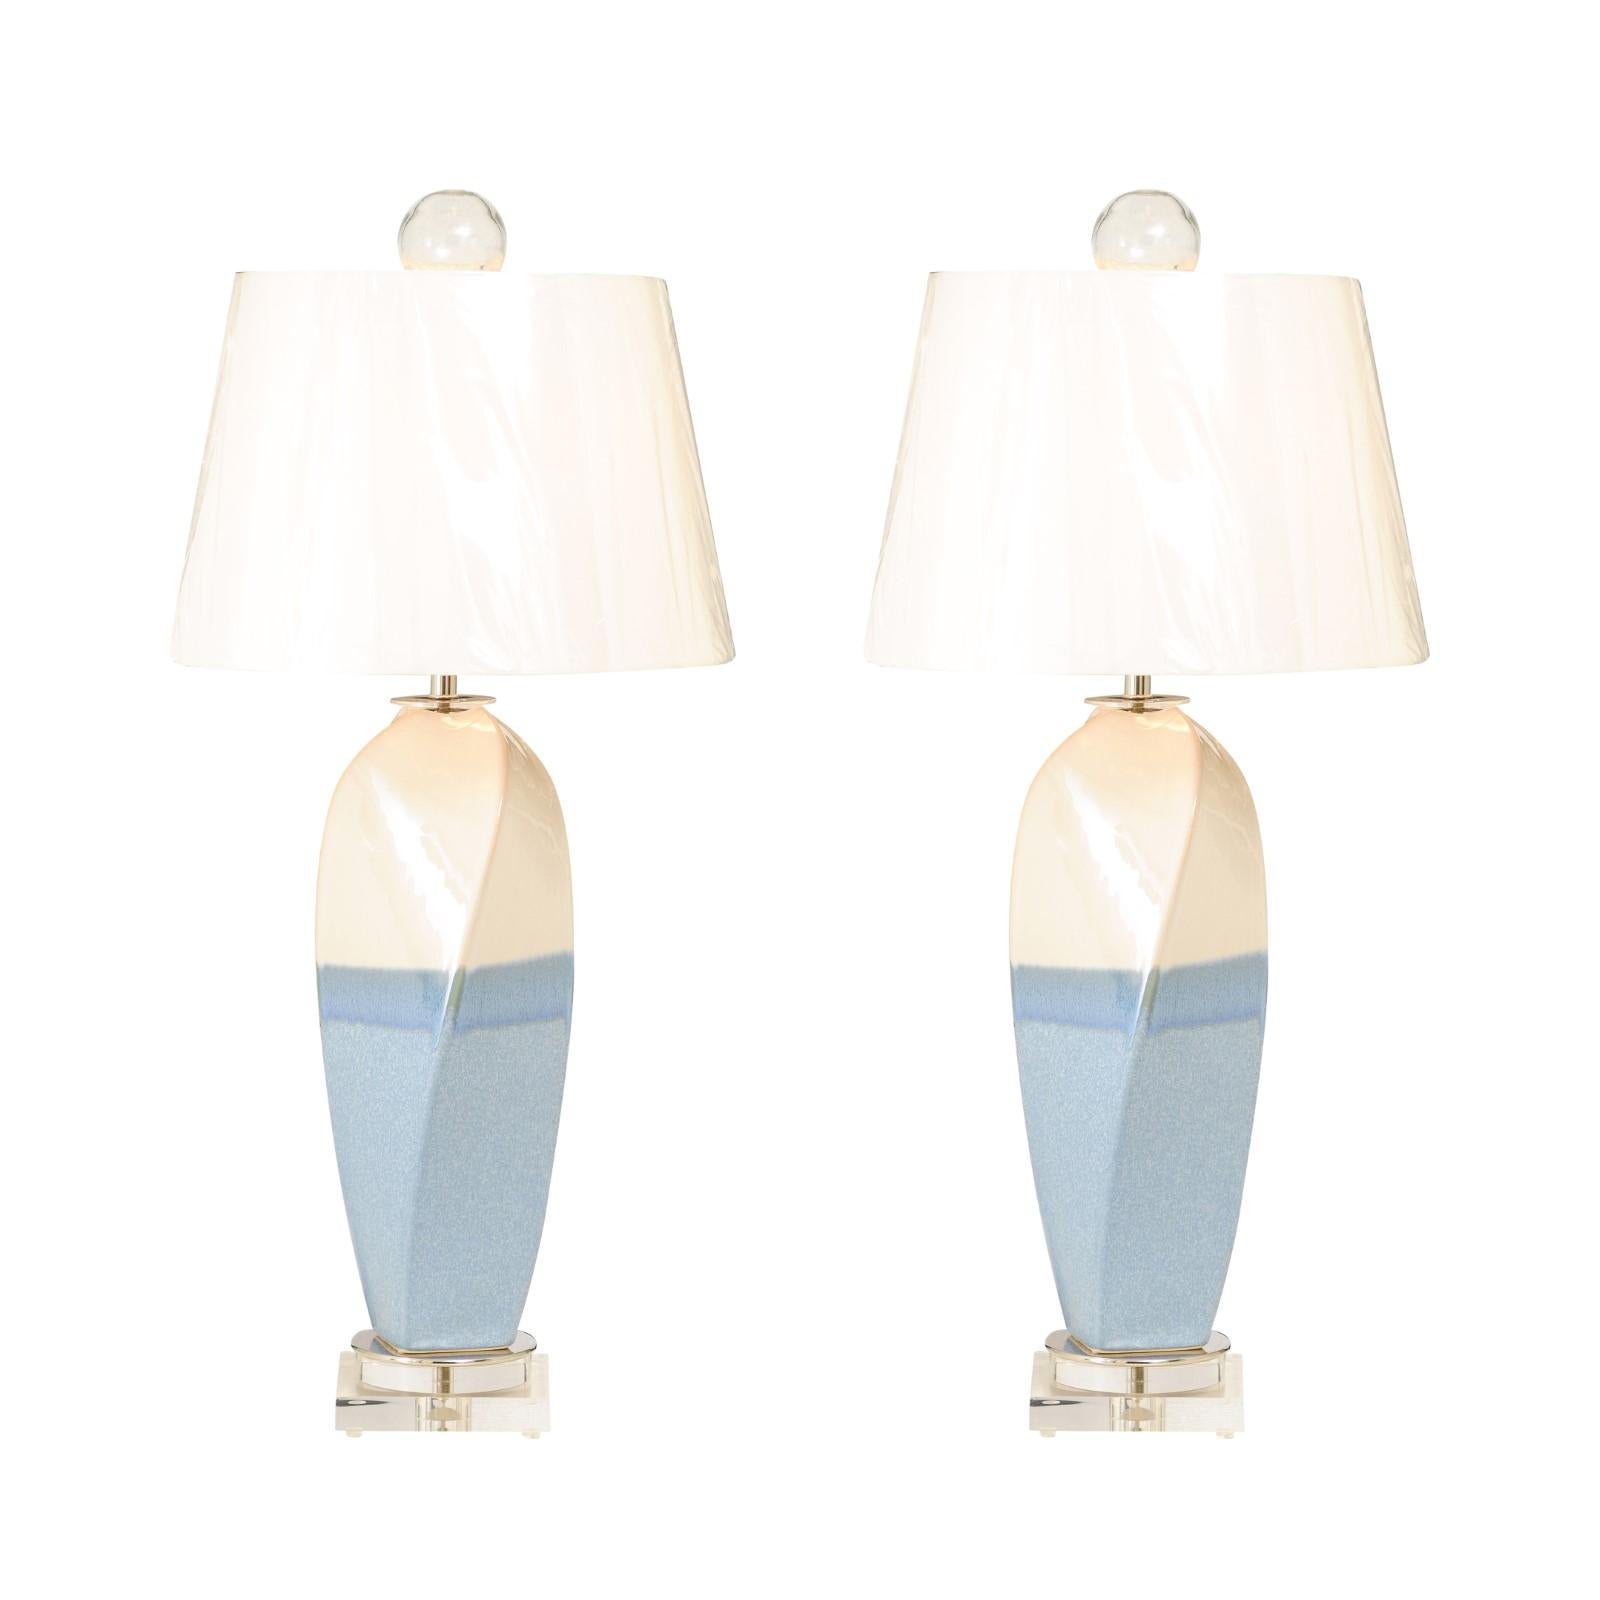 Striking Pair of Custom Portuguese Ceramic Lamps in Cream and Sultanabad Blue For Sale 1